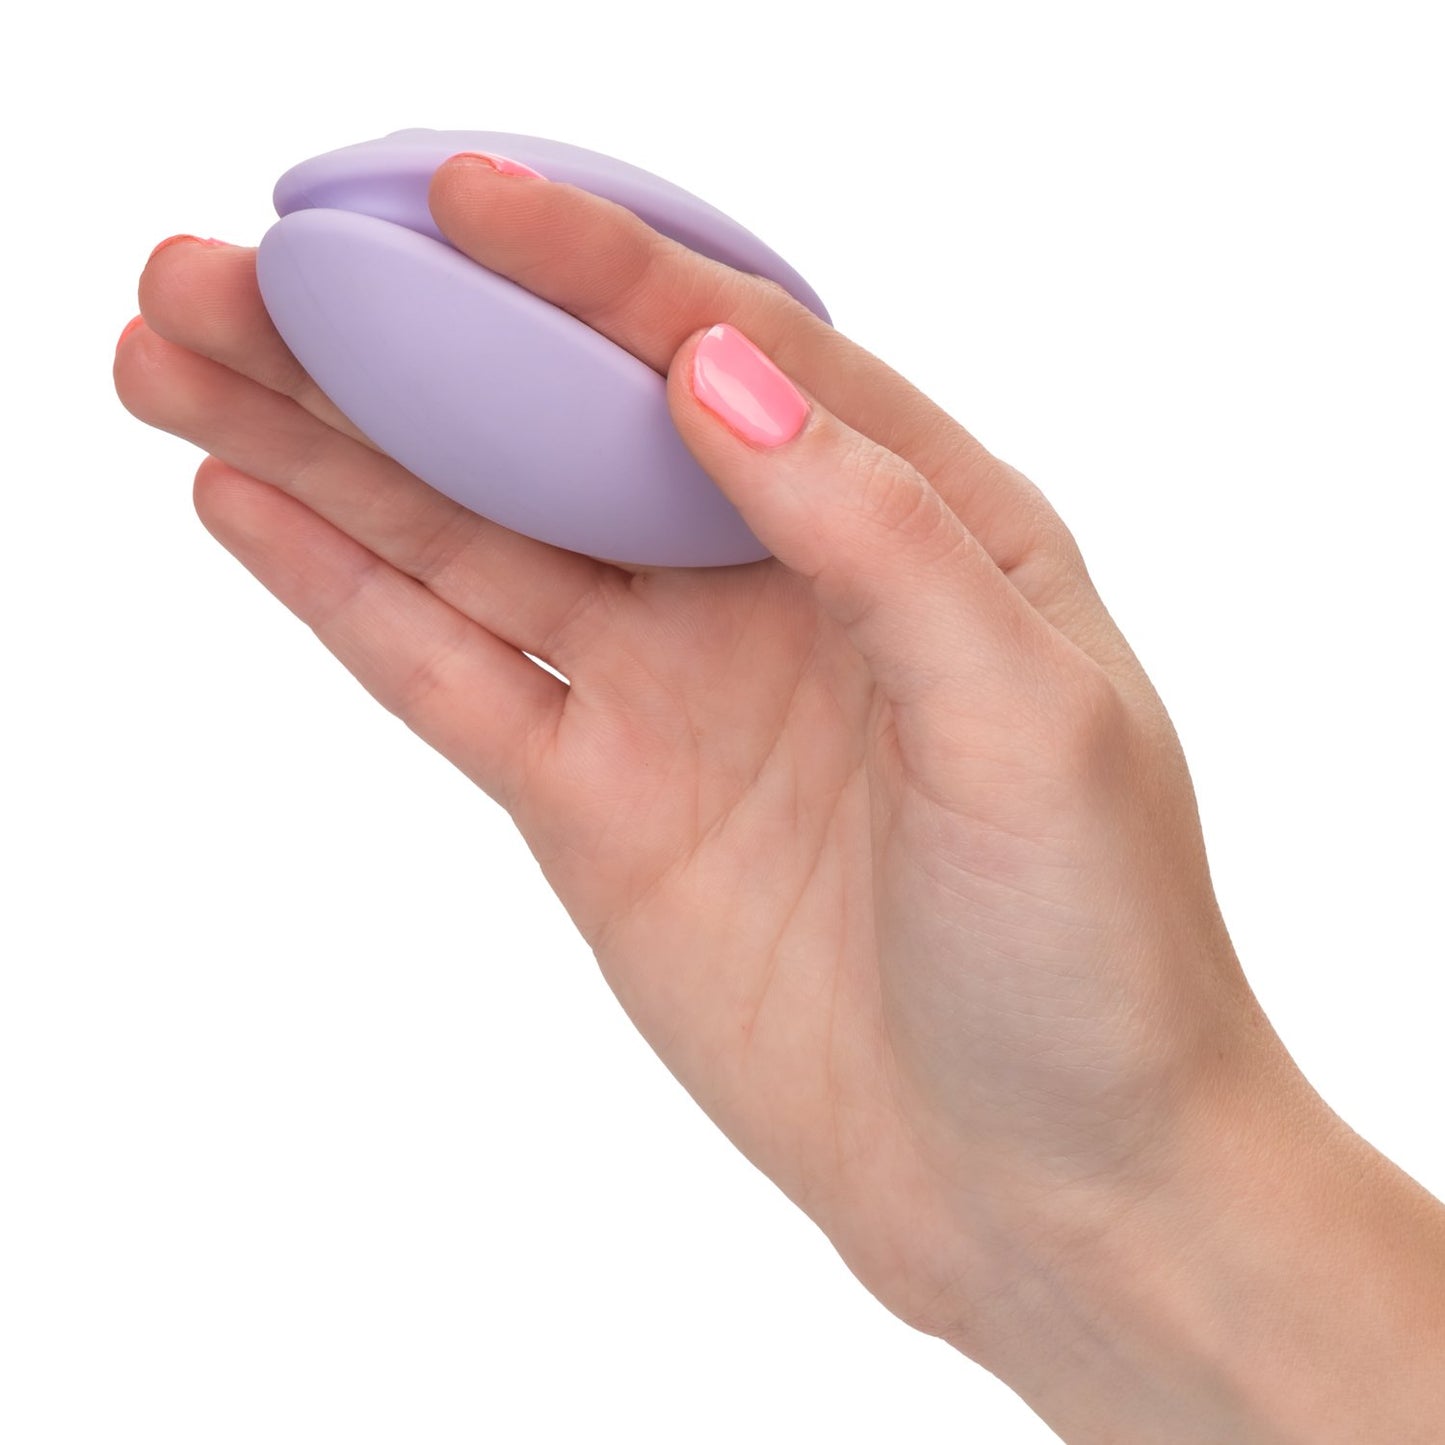 Dr. Laura Berman Rechargeable Palm-Sized Silicone Massager